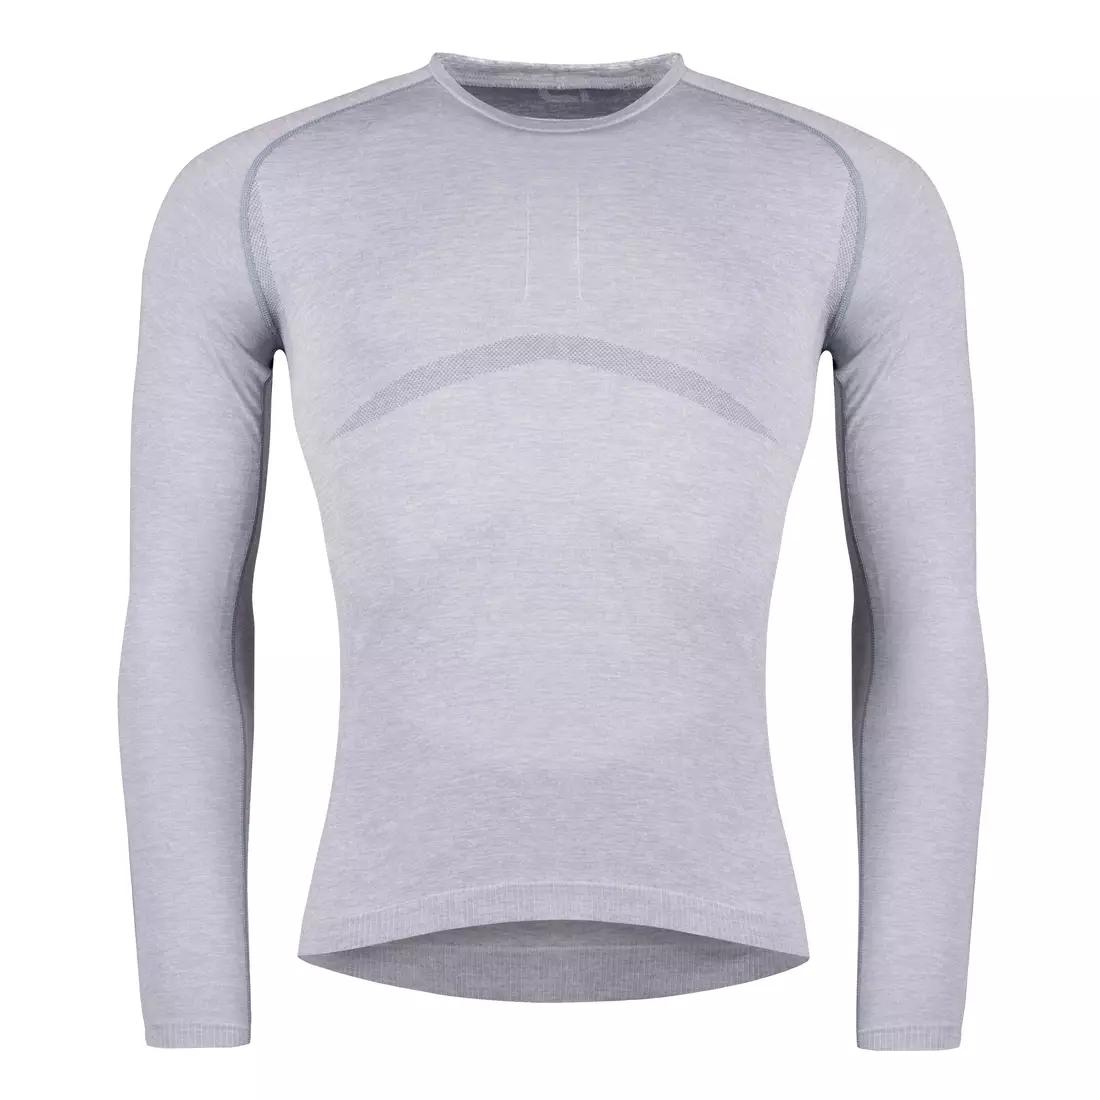 FORCE Thermoaktives Herren-T-Shirt SOFT grey 9034161